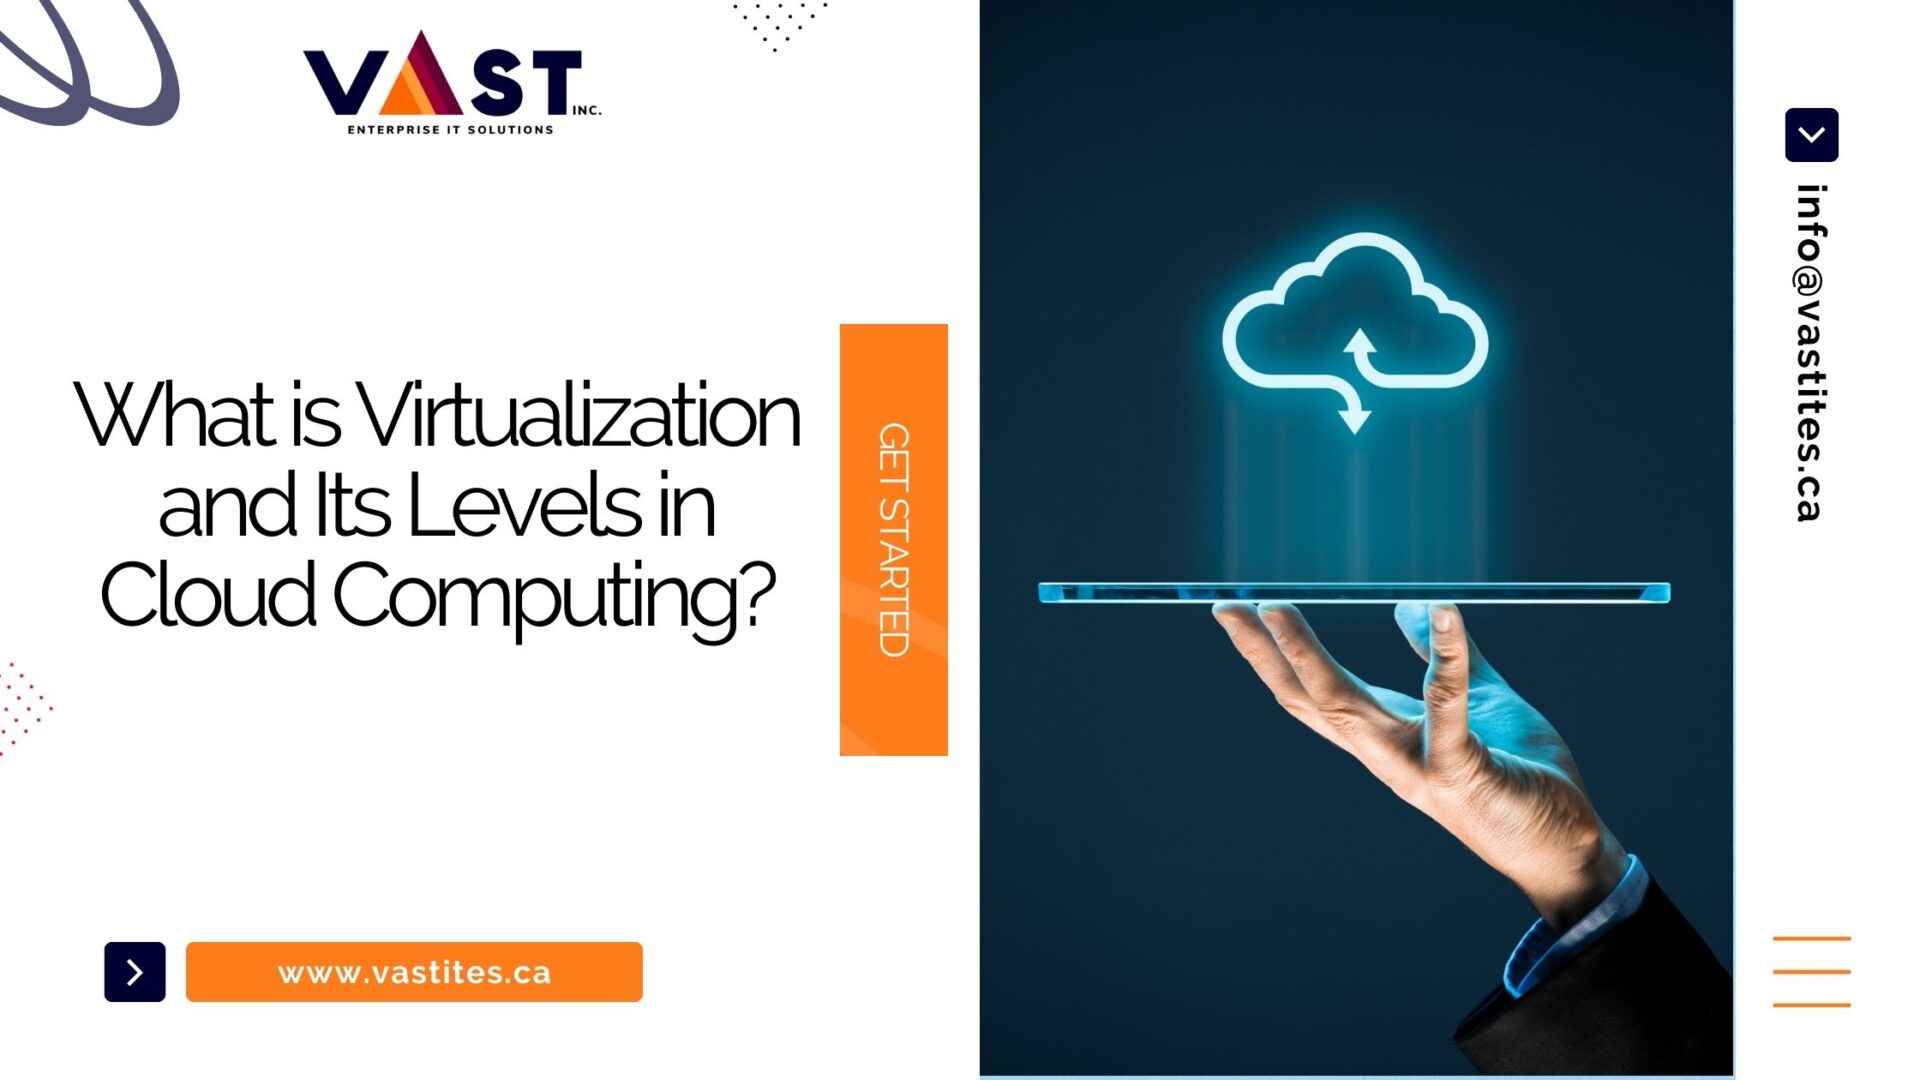 What is Virtualization and Its Levels in Cloud Computing - VaST ITES INC